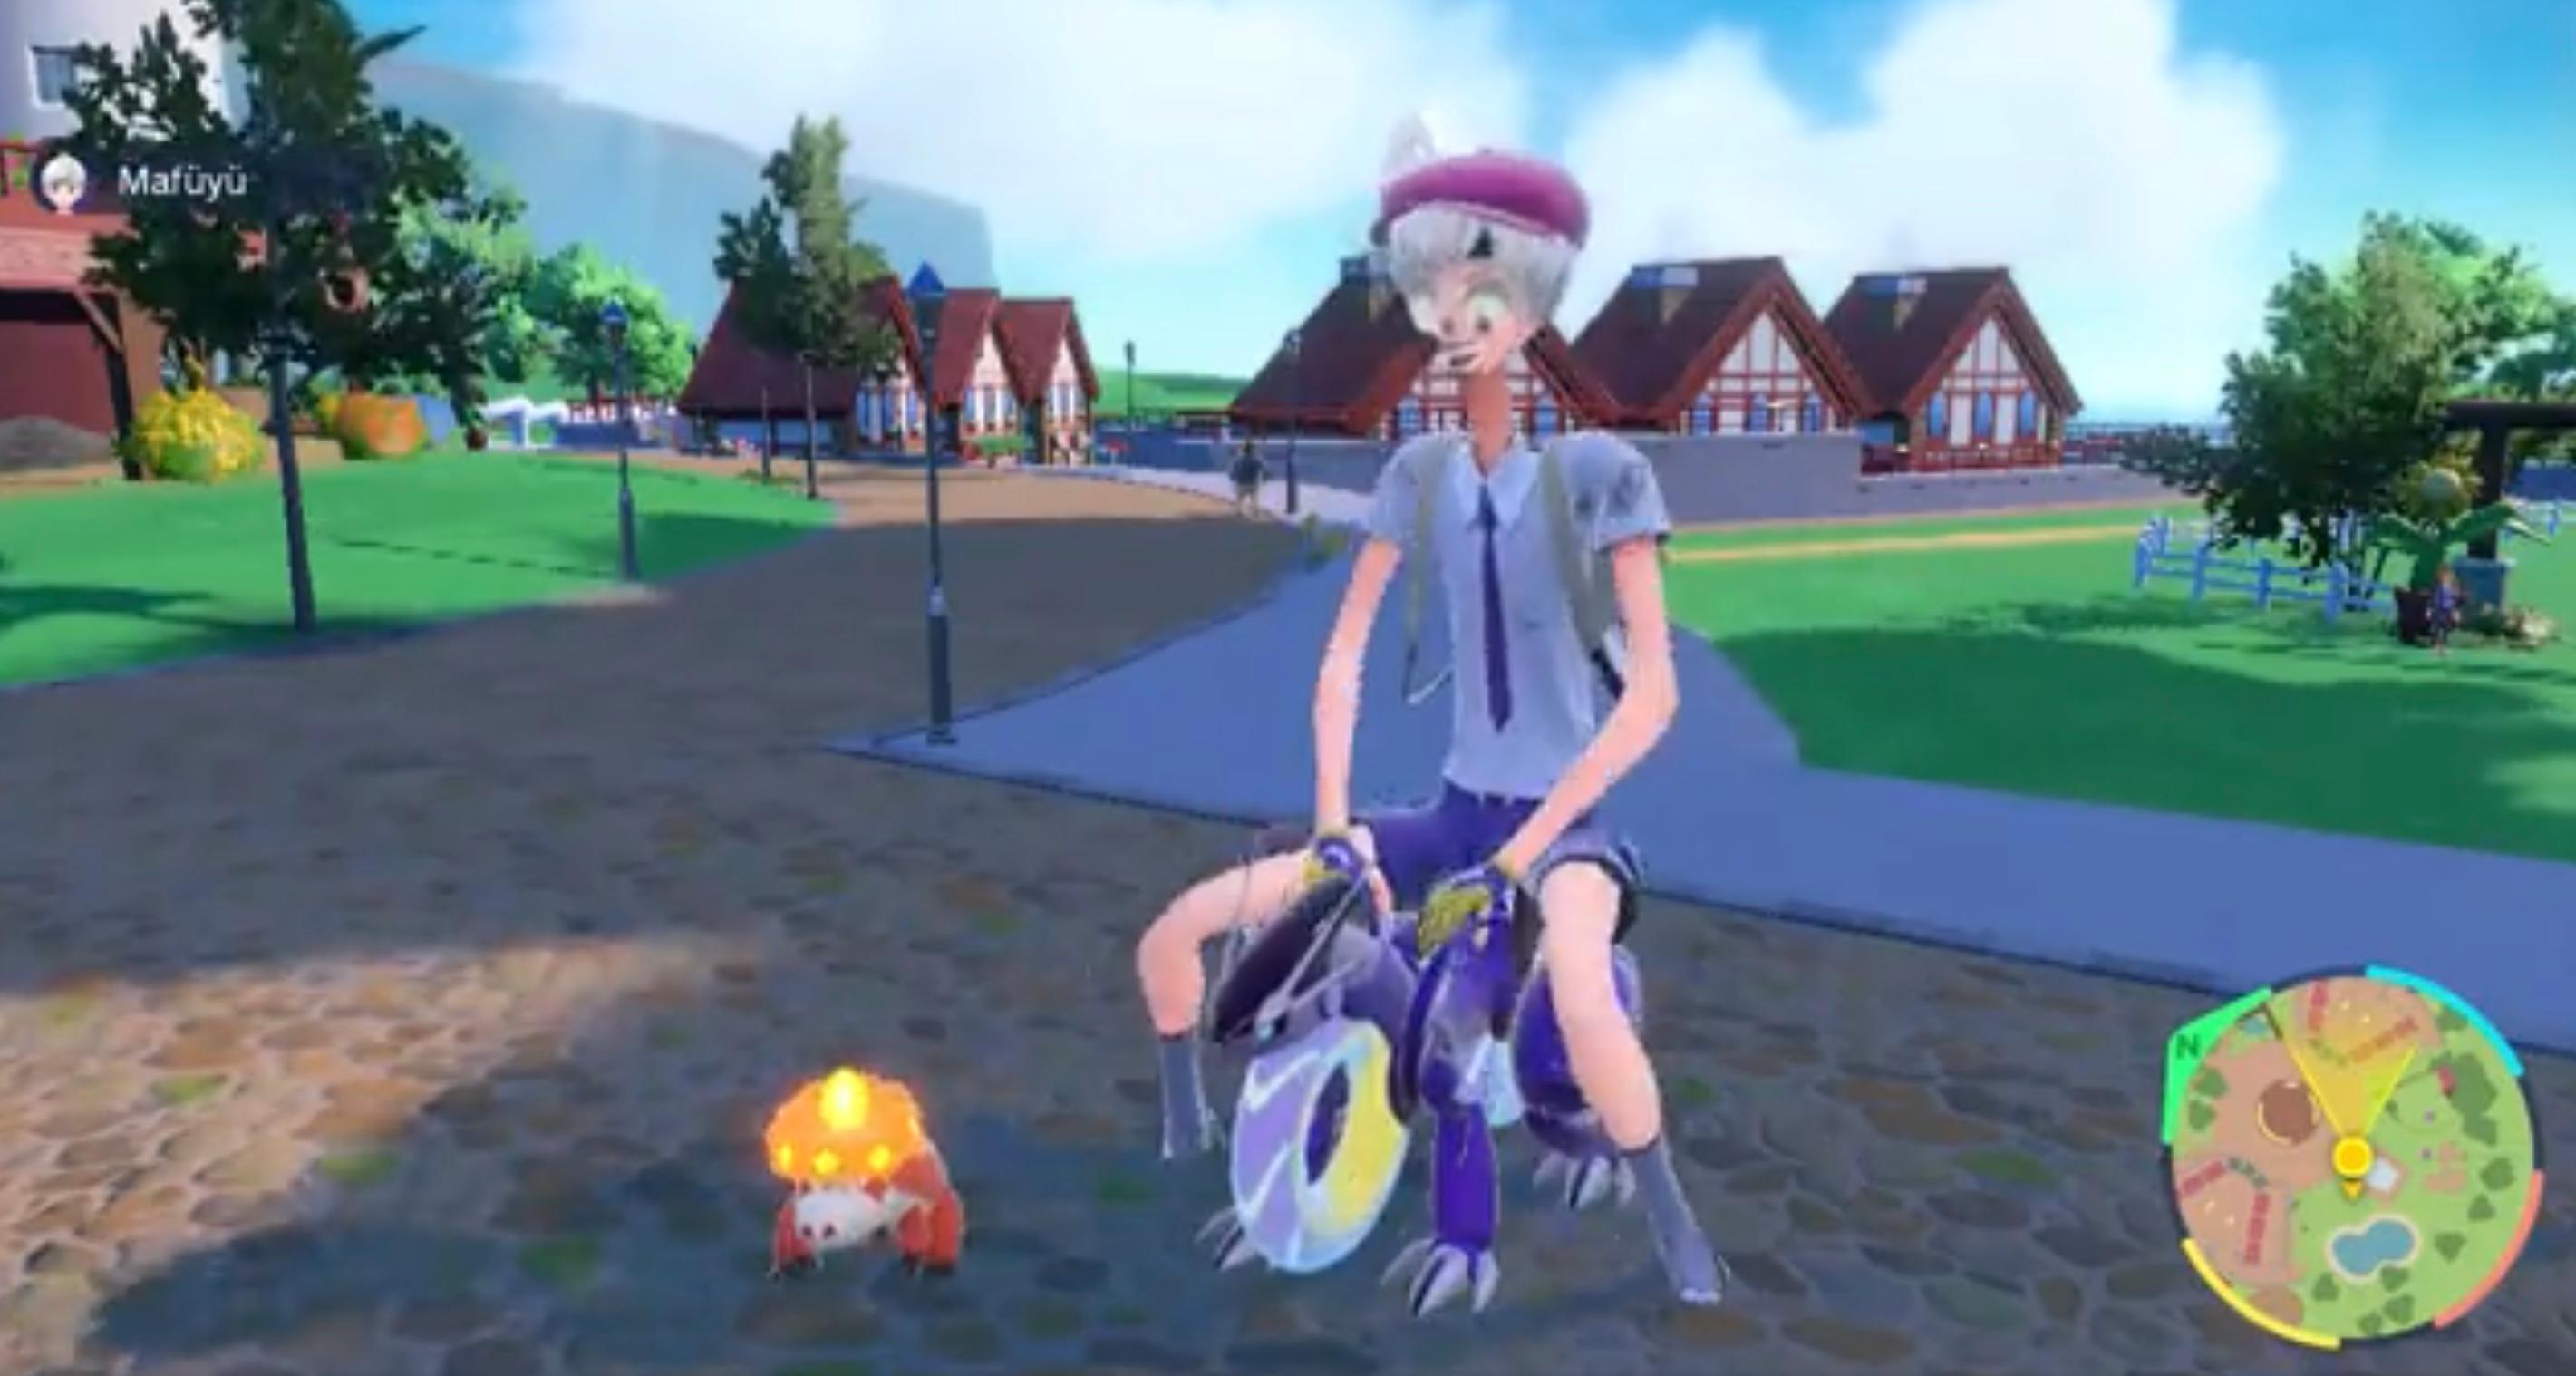 Pokémon Scarlet/Violet review – poor performance holds an exciting